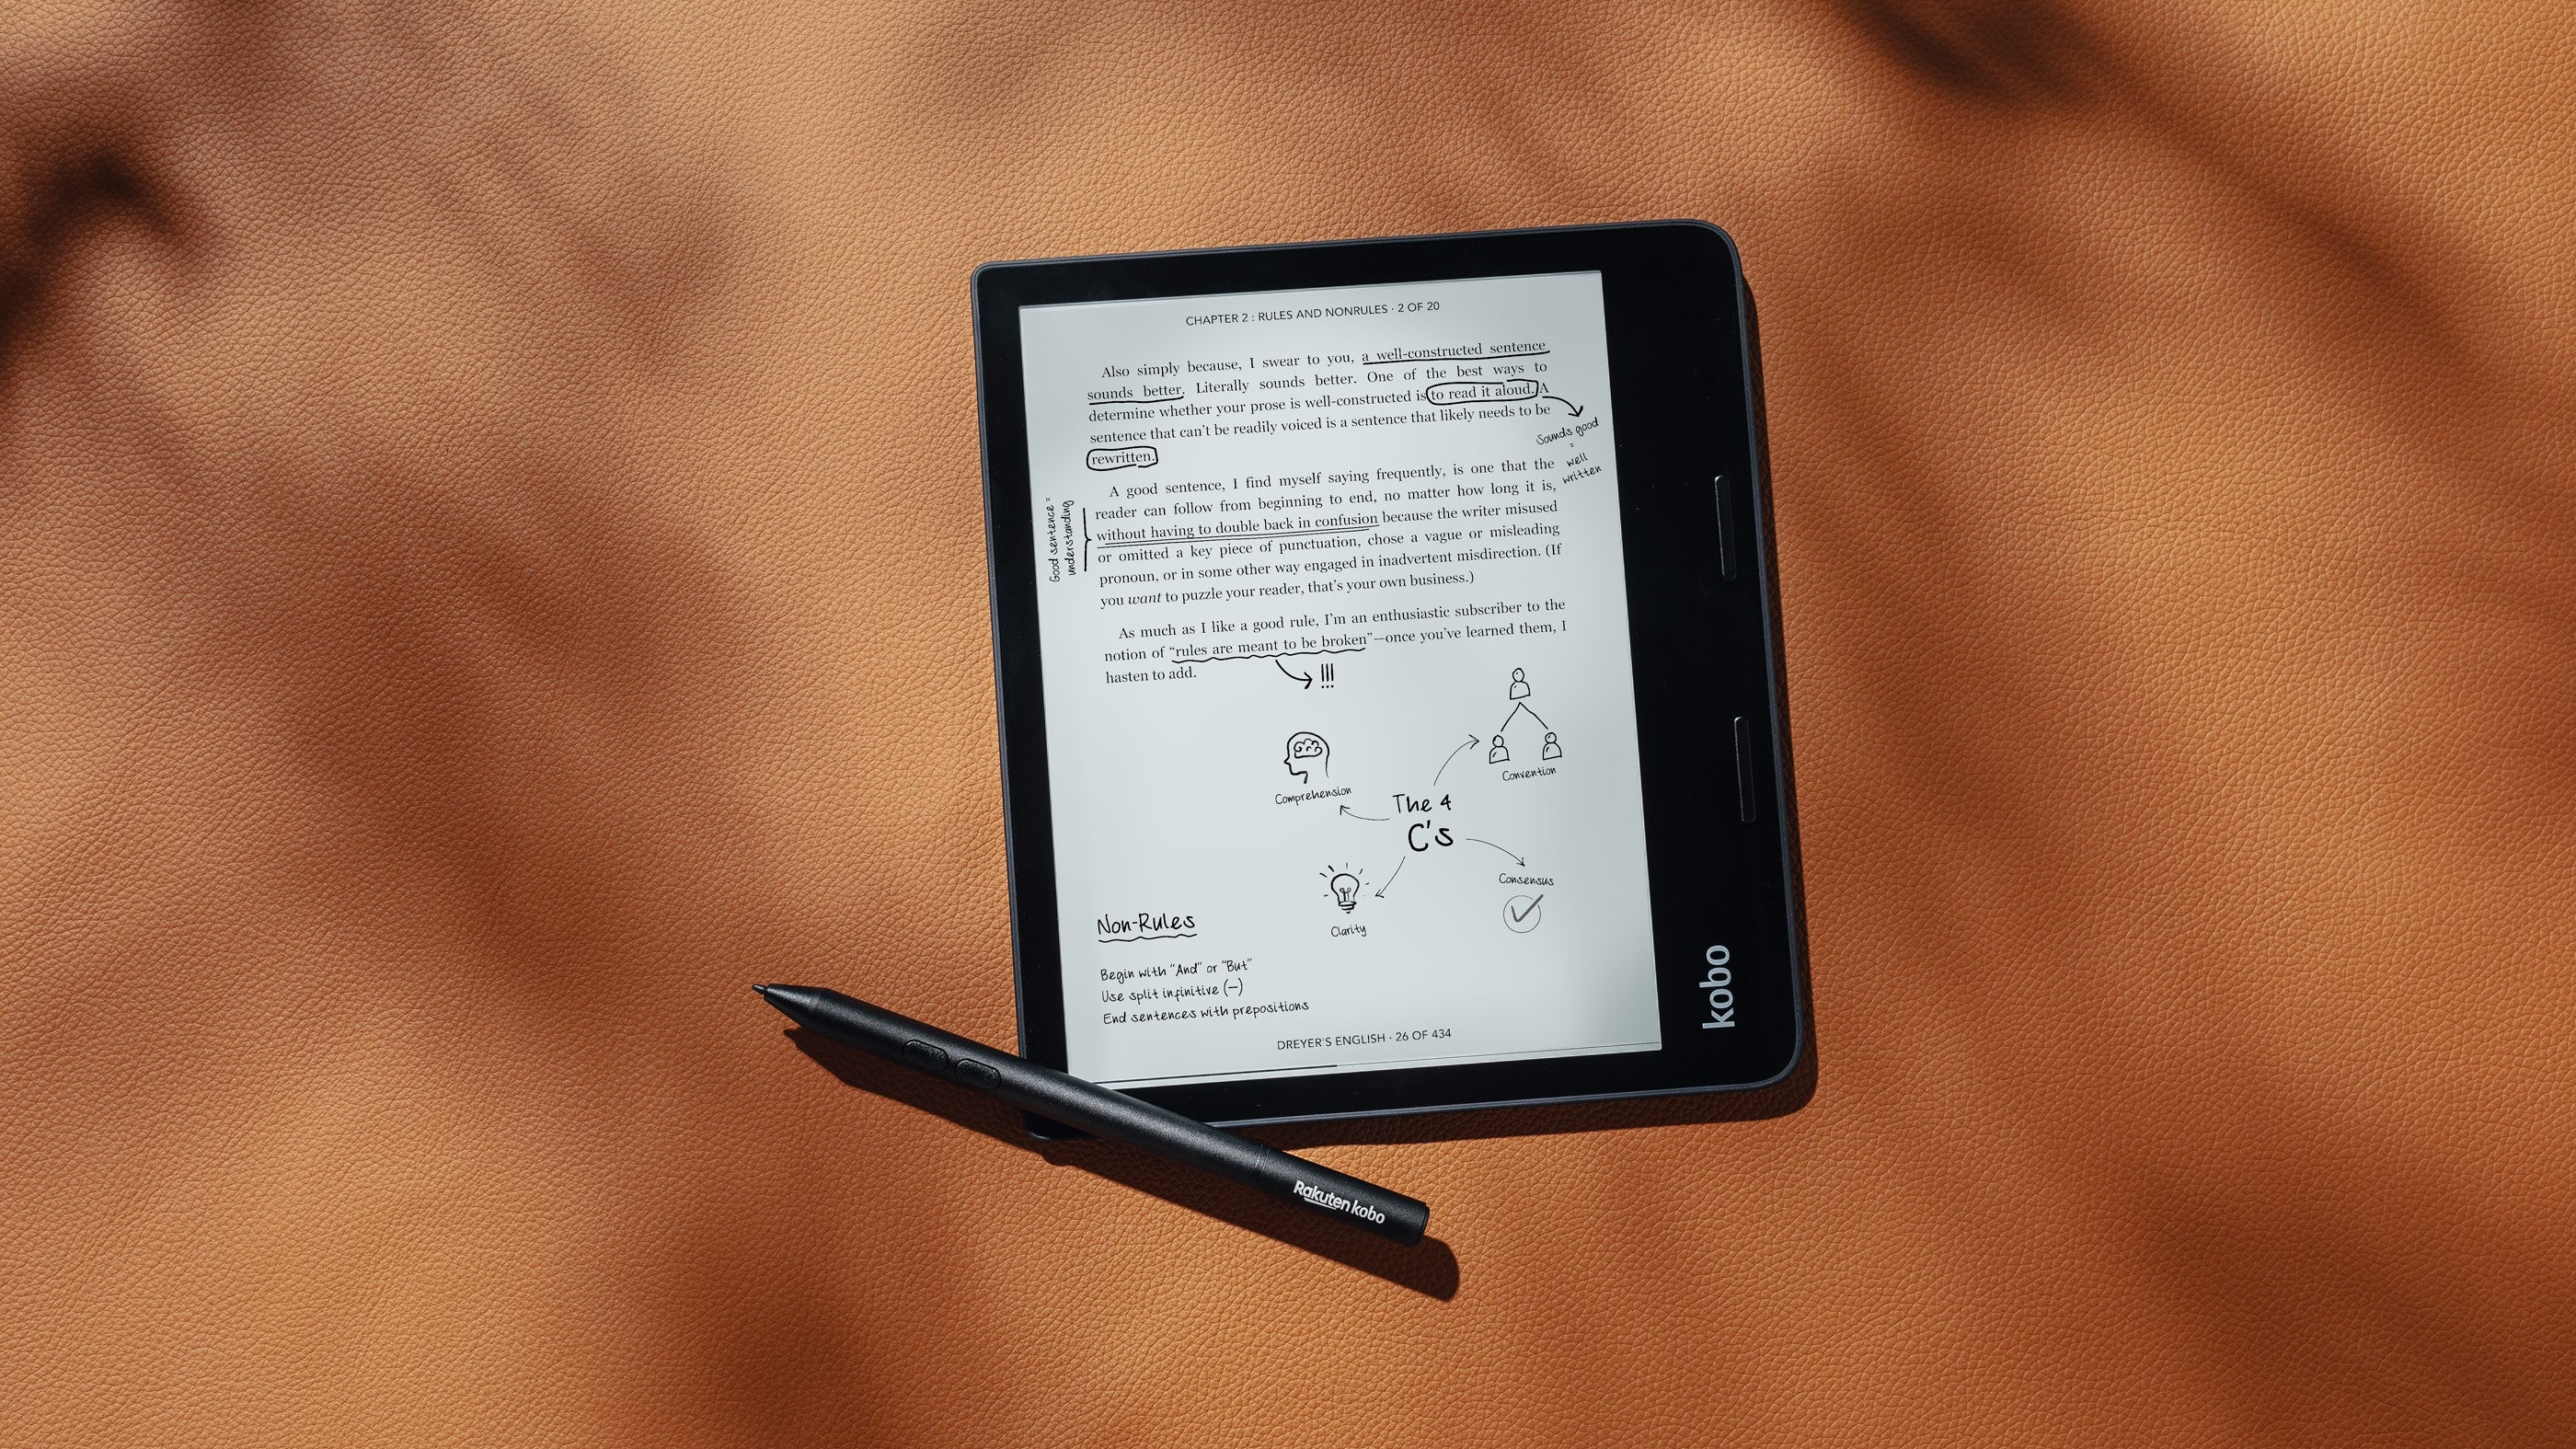 HERE’S EVERYTHING YOU NEED TO KNOW ABOUT KOBO’S NEW EREADERS